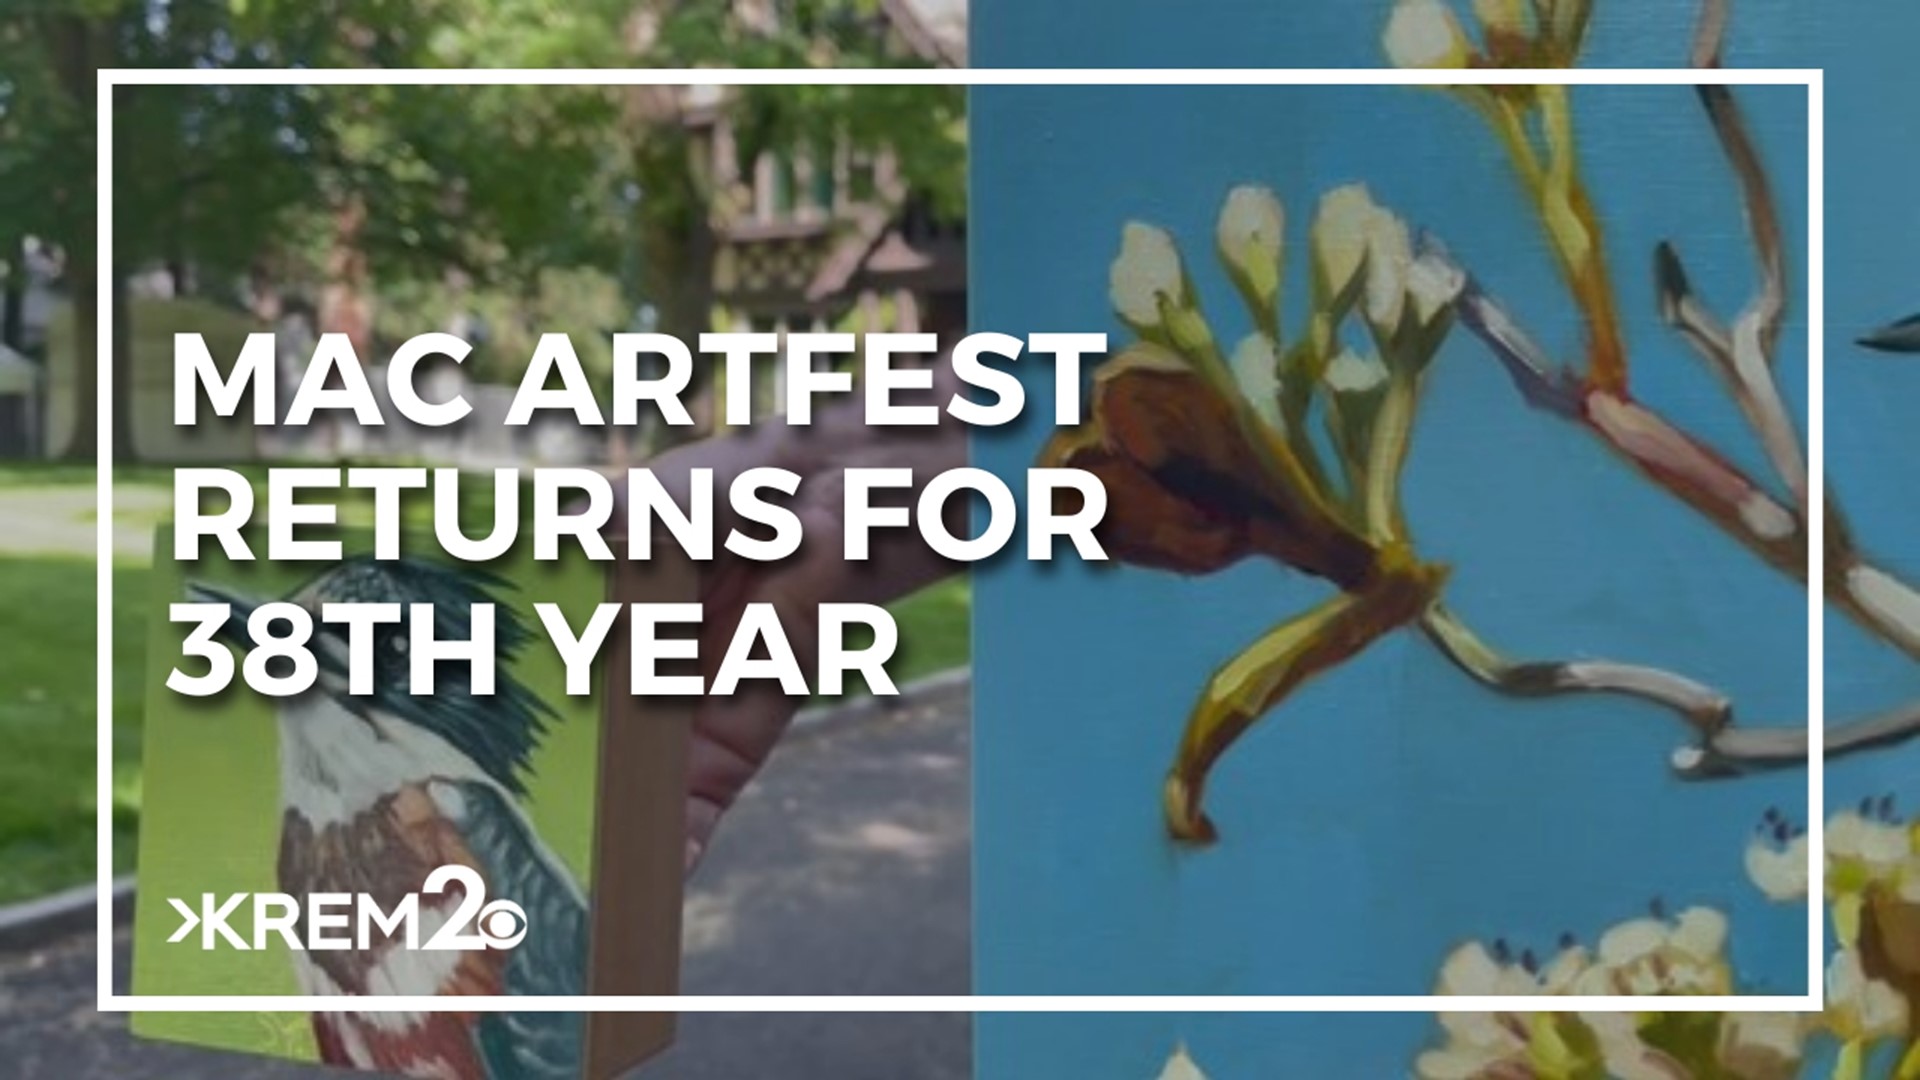 According to organizers, this year’s festival has grown in size as after pandemic setbacks. 75 artists will have booths set up compared to 50 at the last ArtFest.